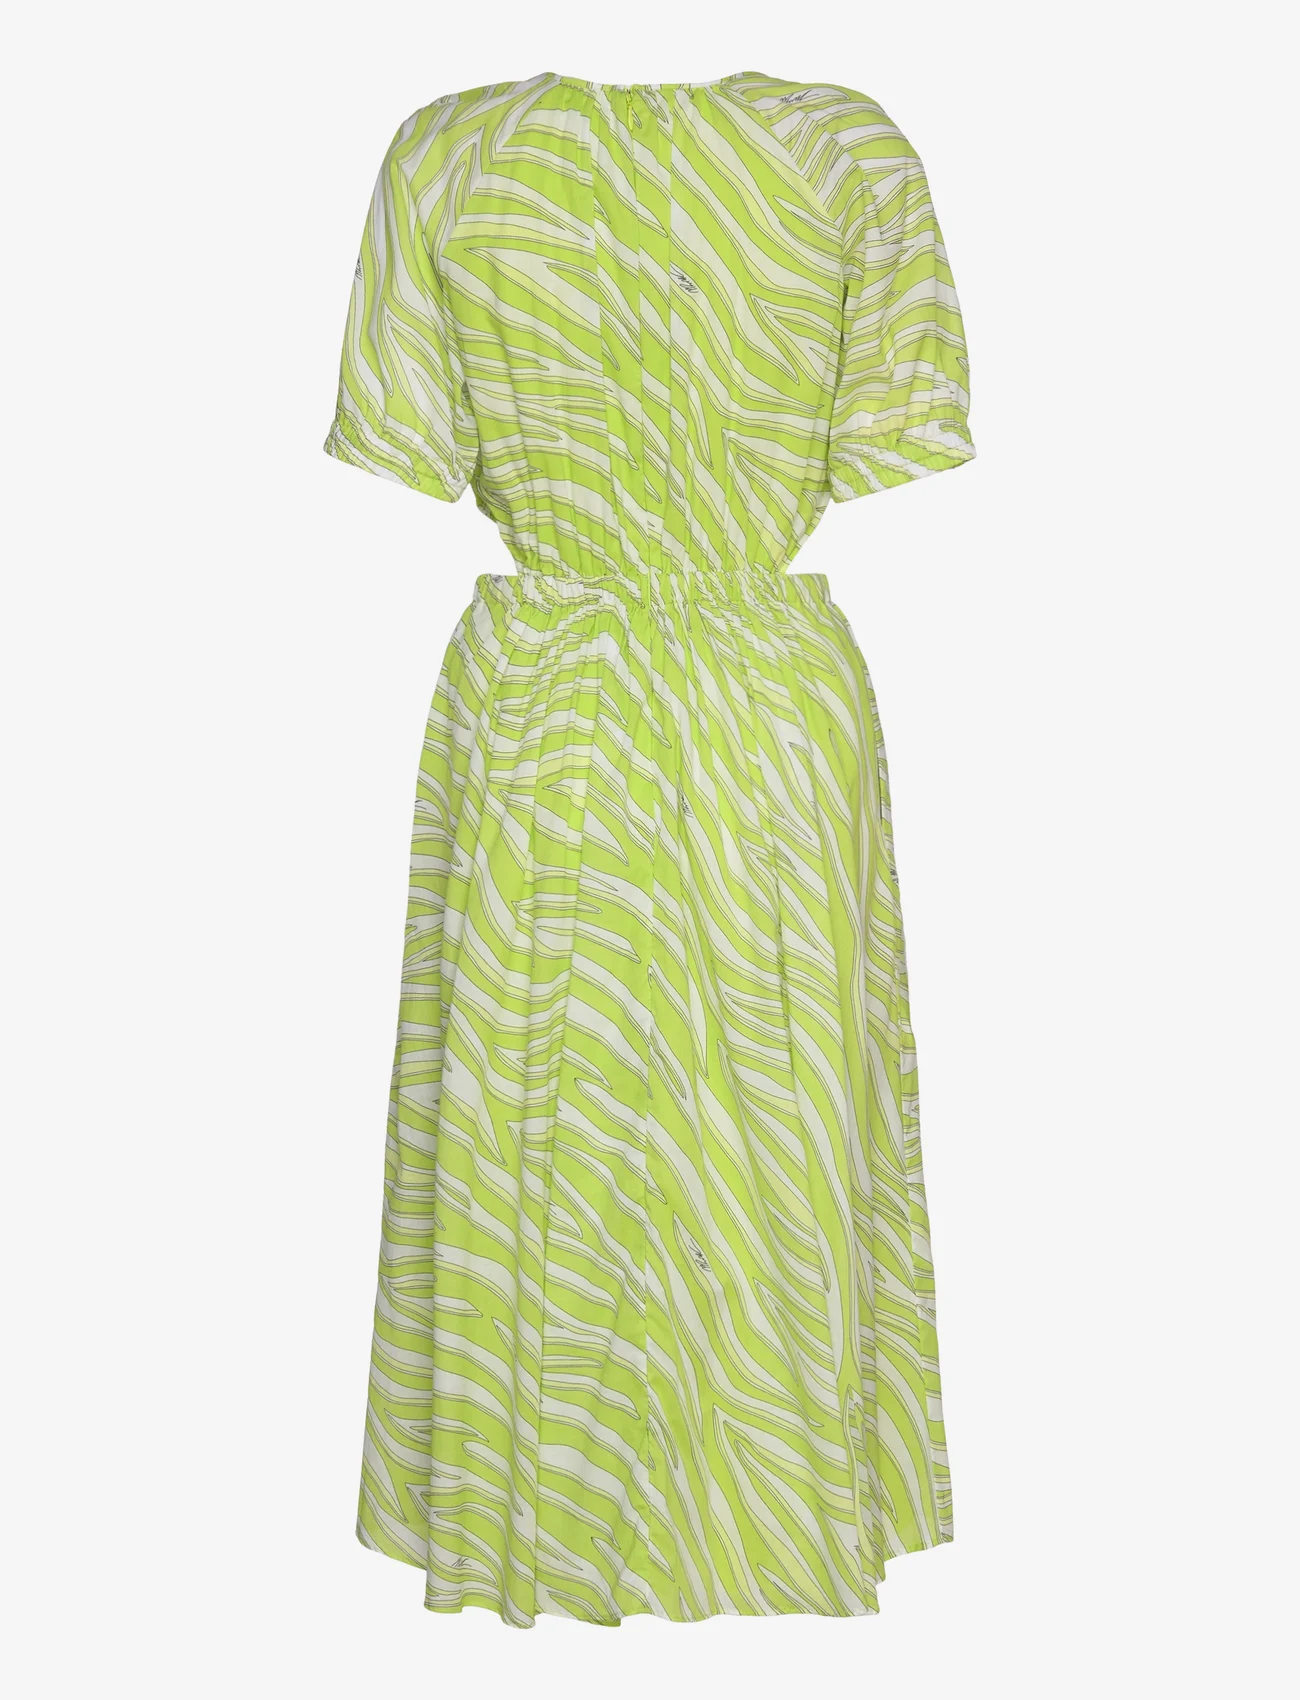 Michael Kors - LARGE ZEBRA MIDI DRS - party wear at outlet prices - brt limeade - 1